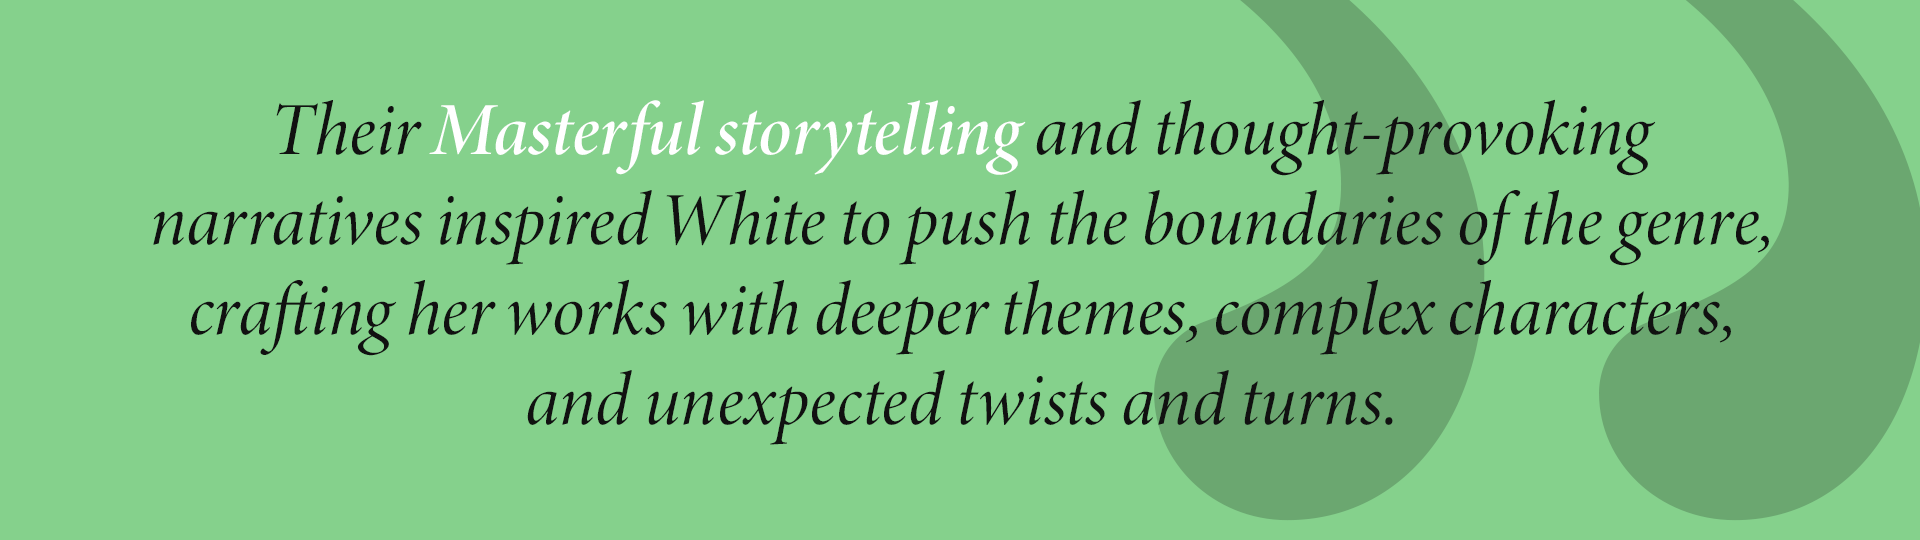 Their Masterful storytelling and thought-provoking
narratives inspired White to push the boundaries of the genre, crafting her works with deeper themes, complex characters, and unexpected twists and turns.